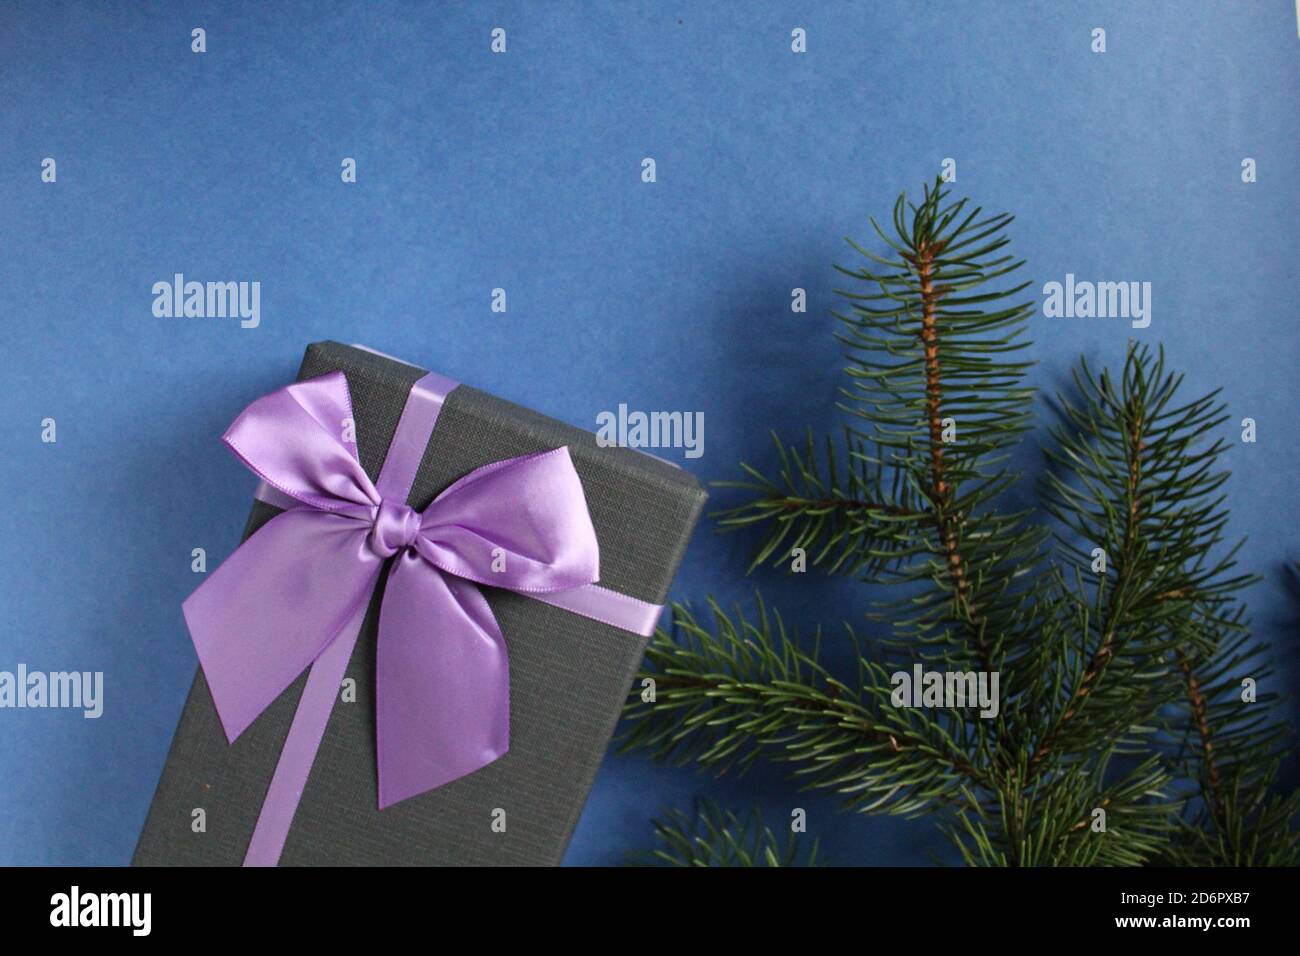 new year's Christmas background gift gift box with purple lilac fuchsia ribbon and bow on a blue background with a branch of spruce pine trees with sp Stock Photo